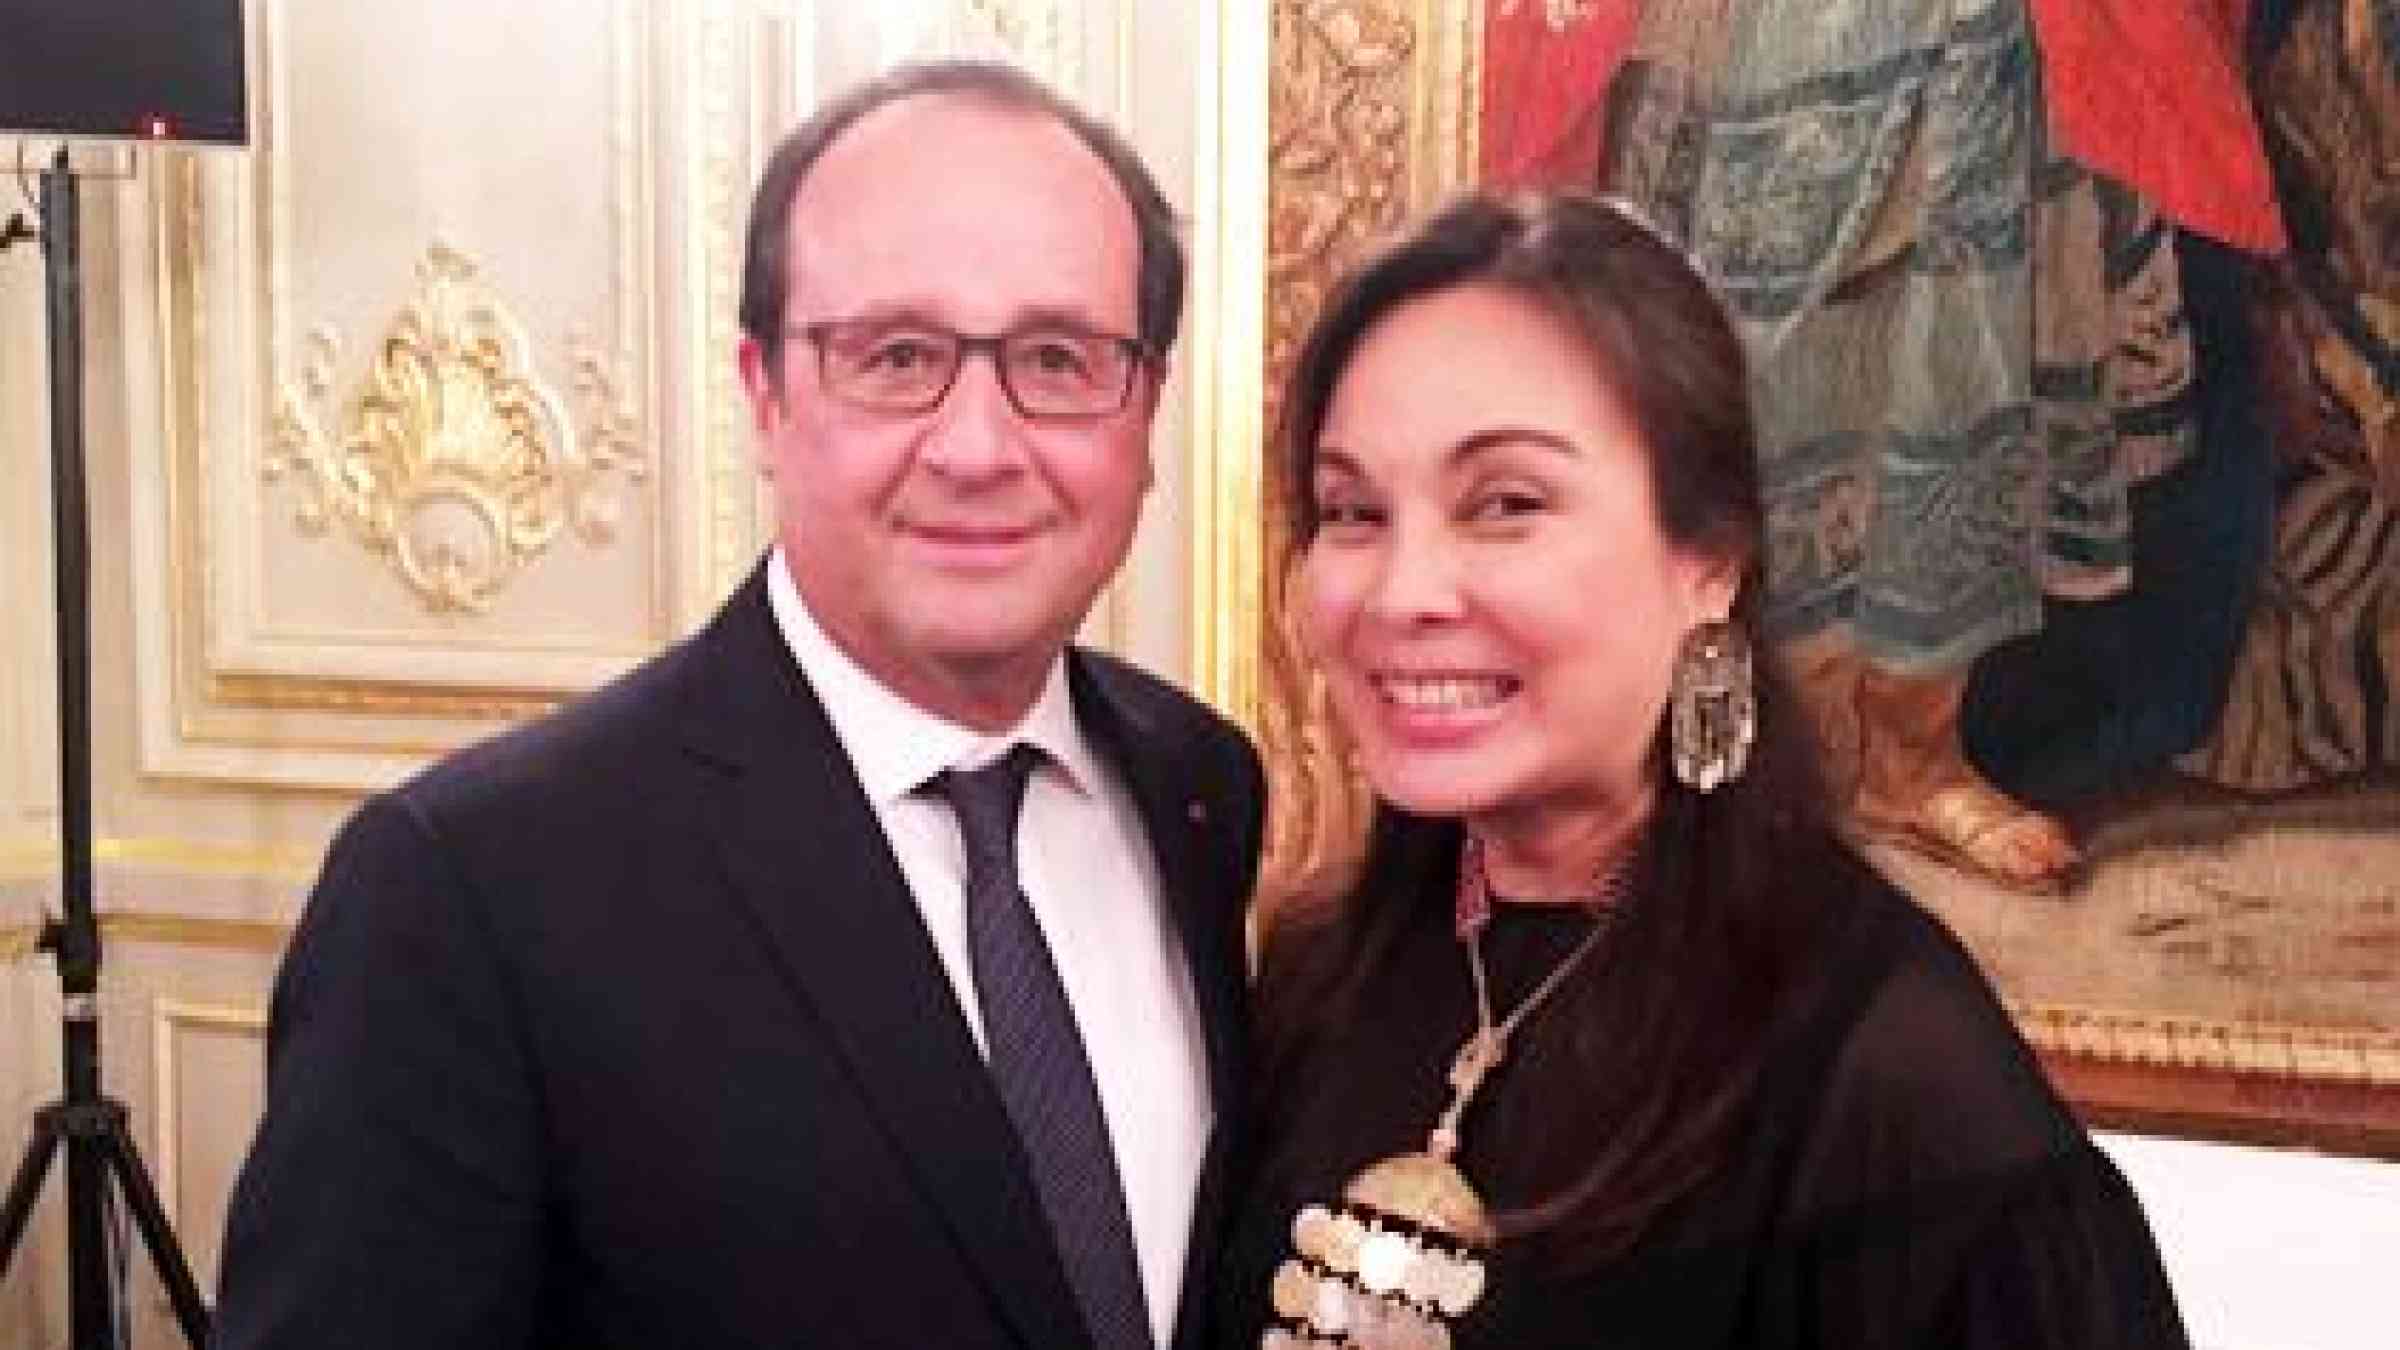 President François Hollande with UNISDR Champion, Senator Loren Legarda at the Summit of the Consciences for the Climate in Paris yesterday. (Photo: UNISDR)